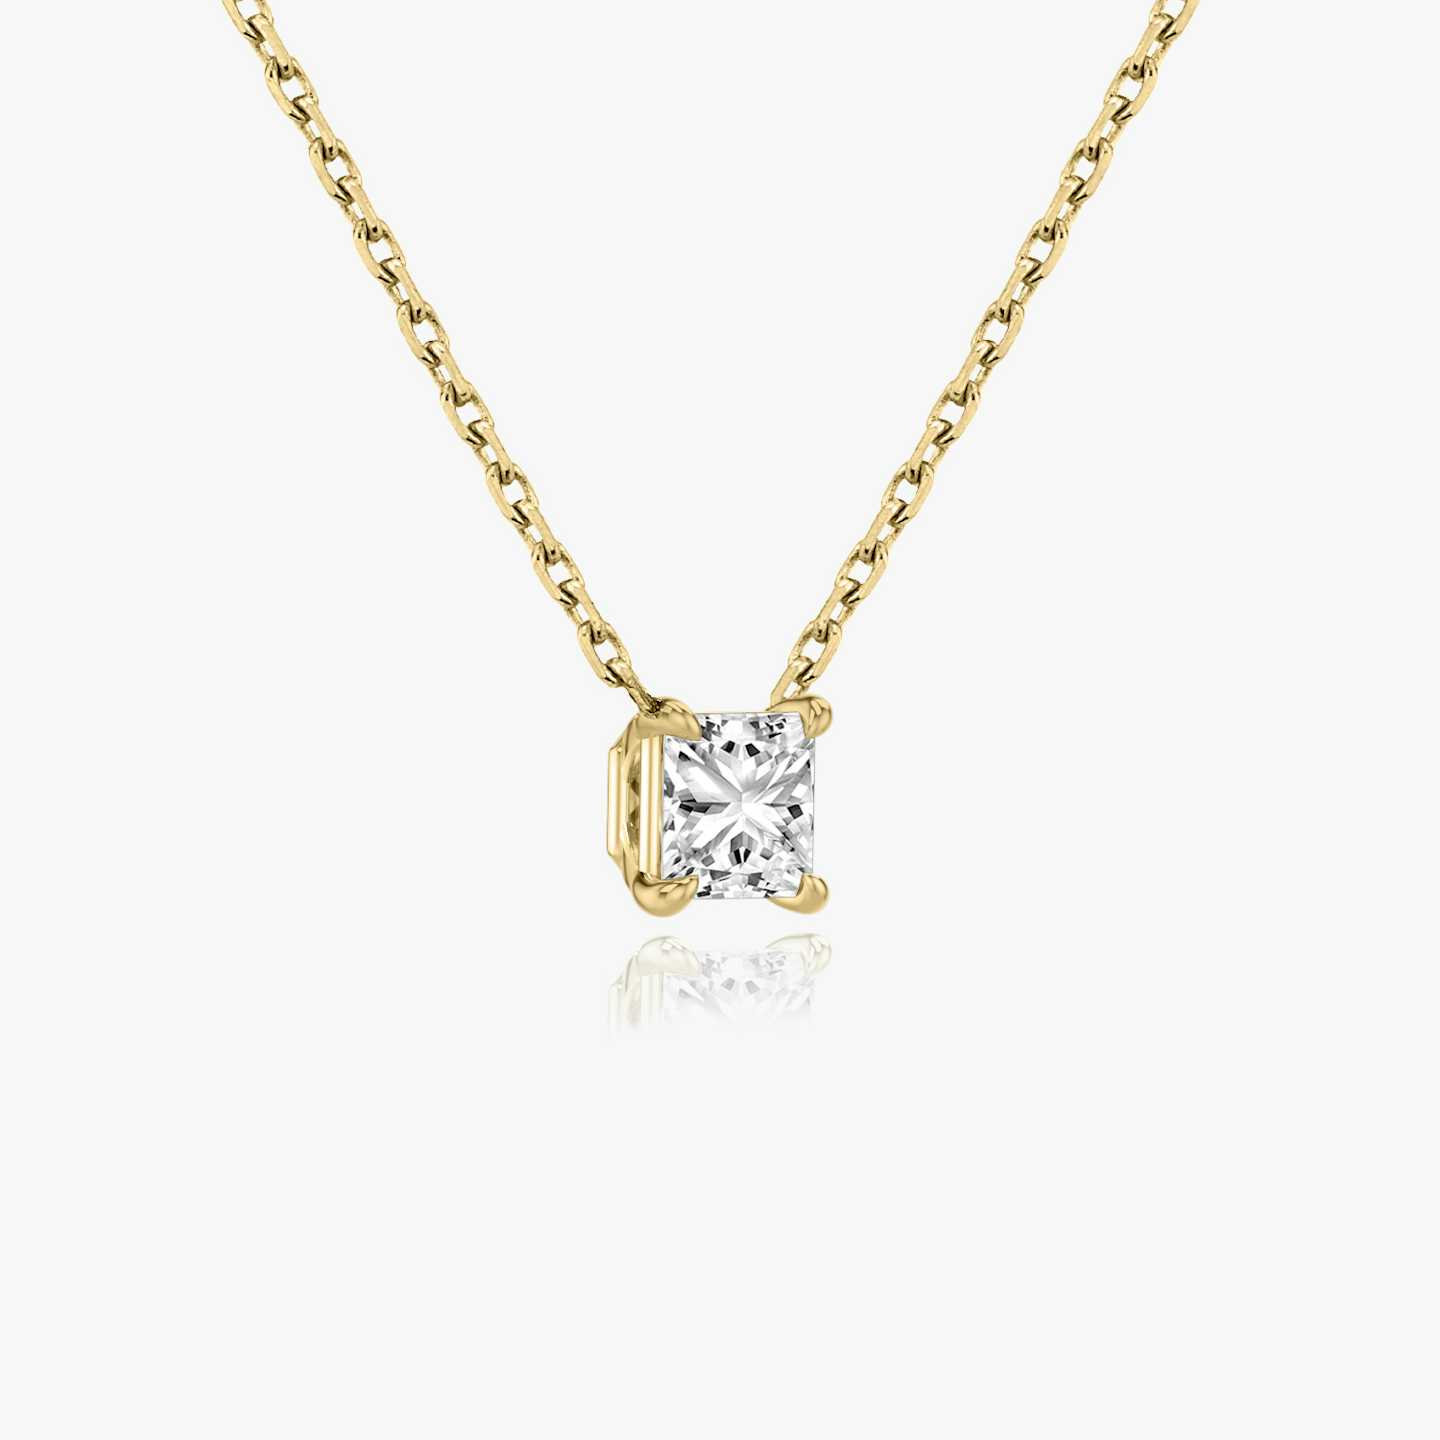 Princess cut diamond necklace in yellow gold side view